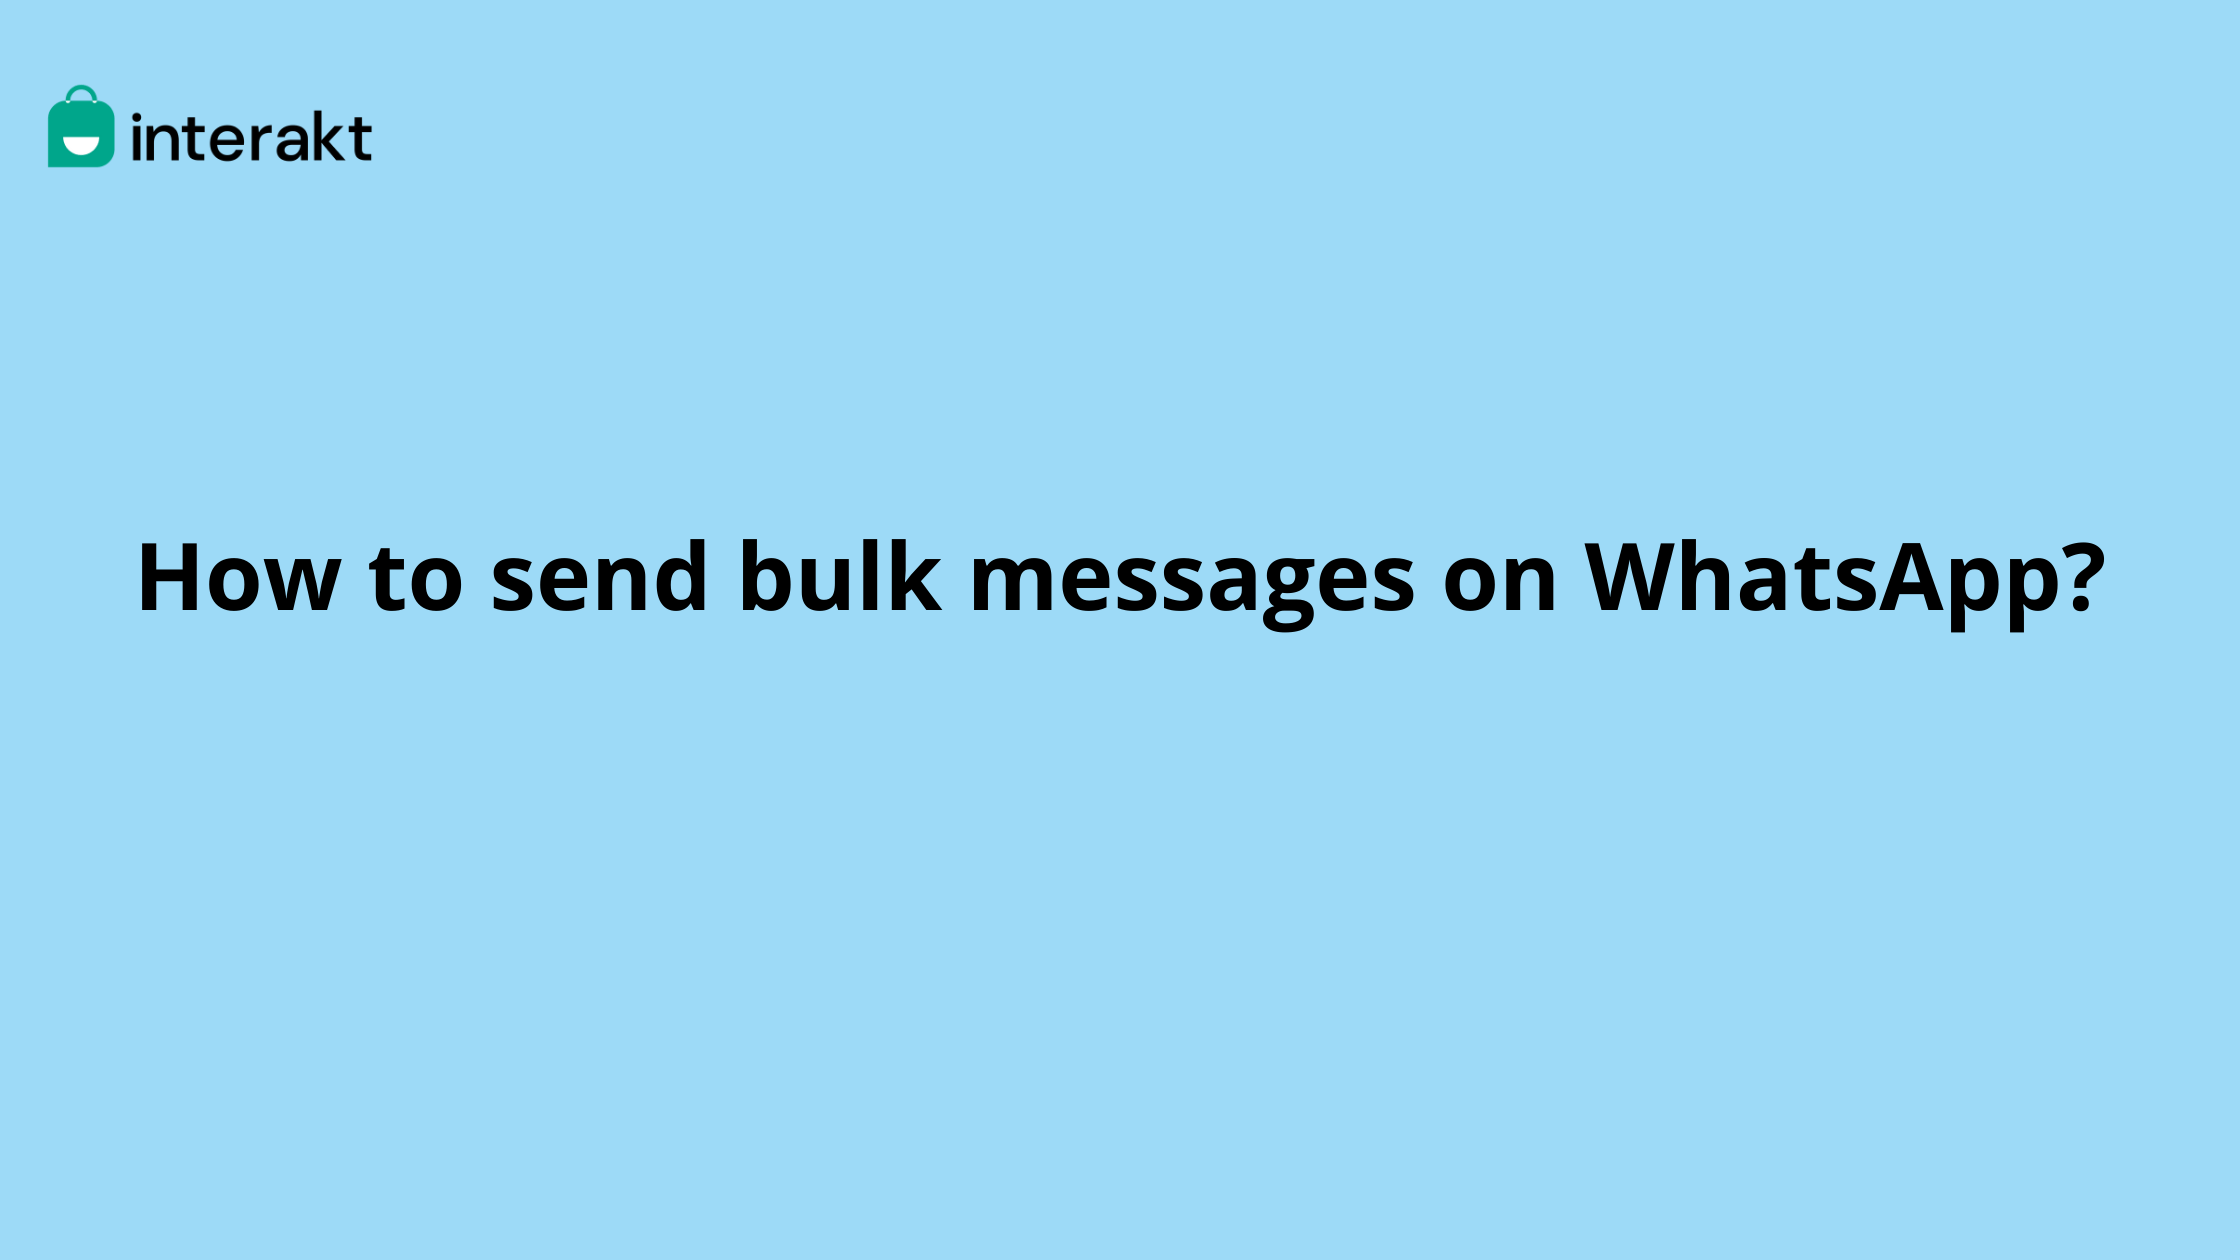 How to send bulk messages on WhatsApp